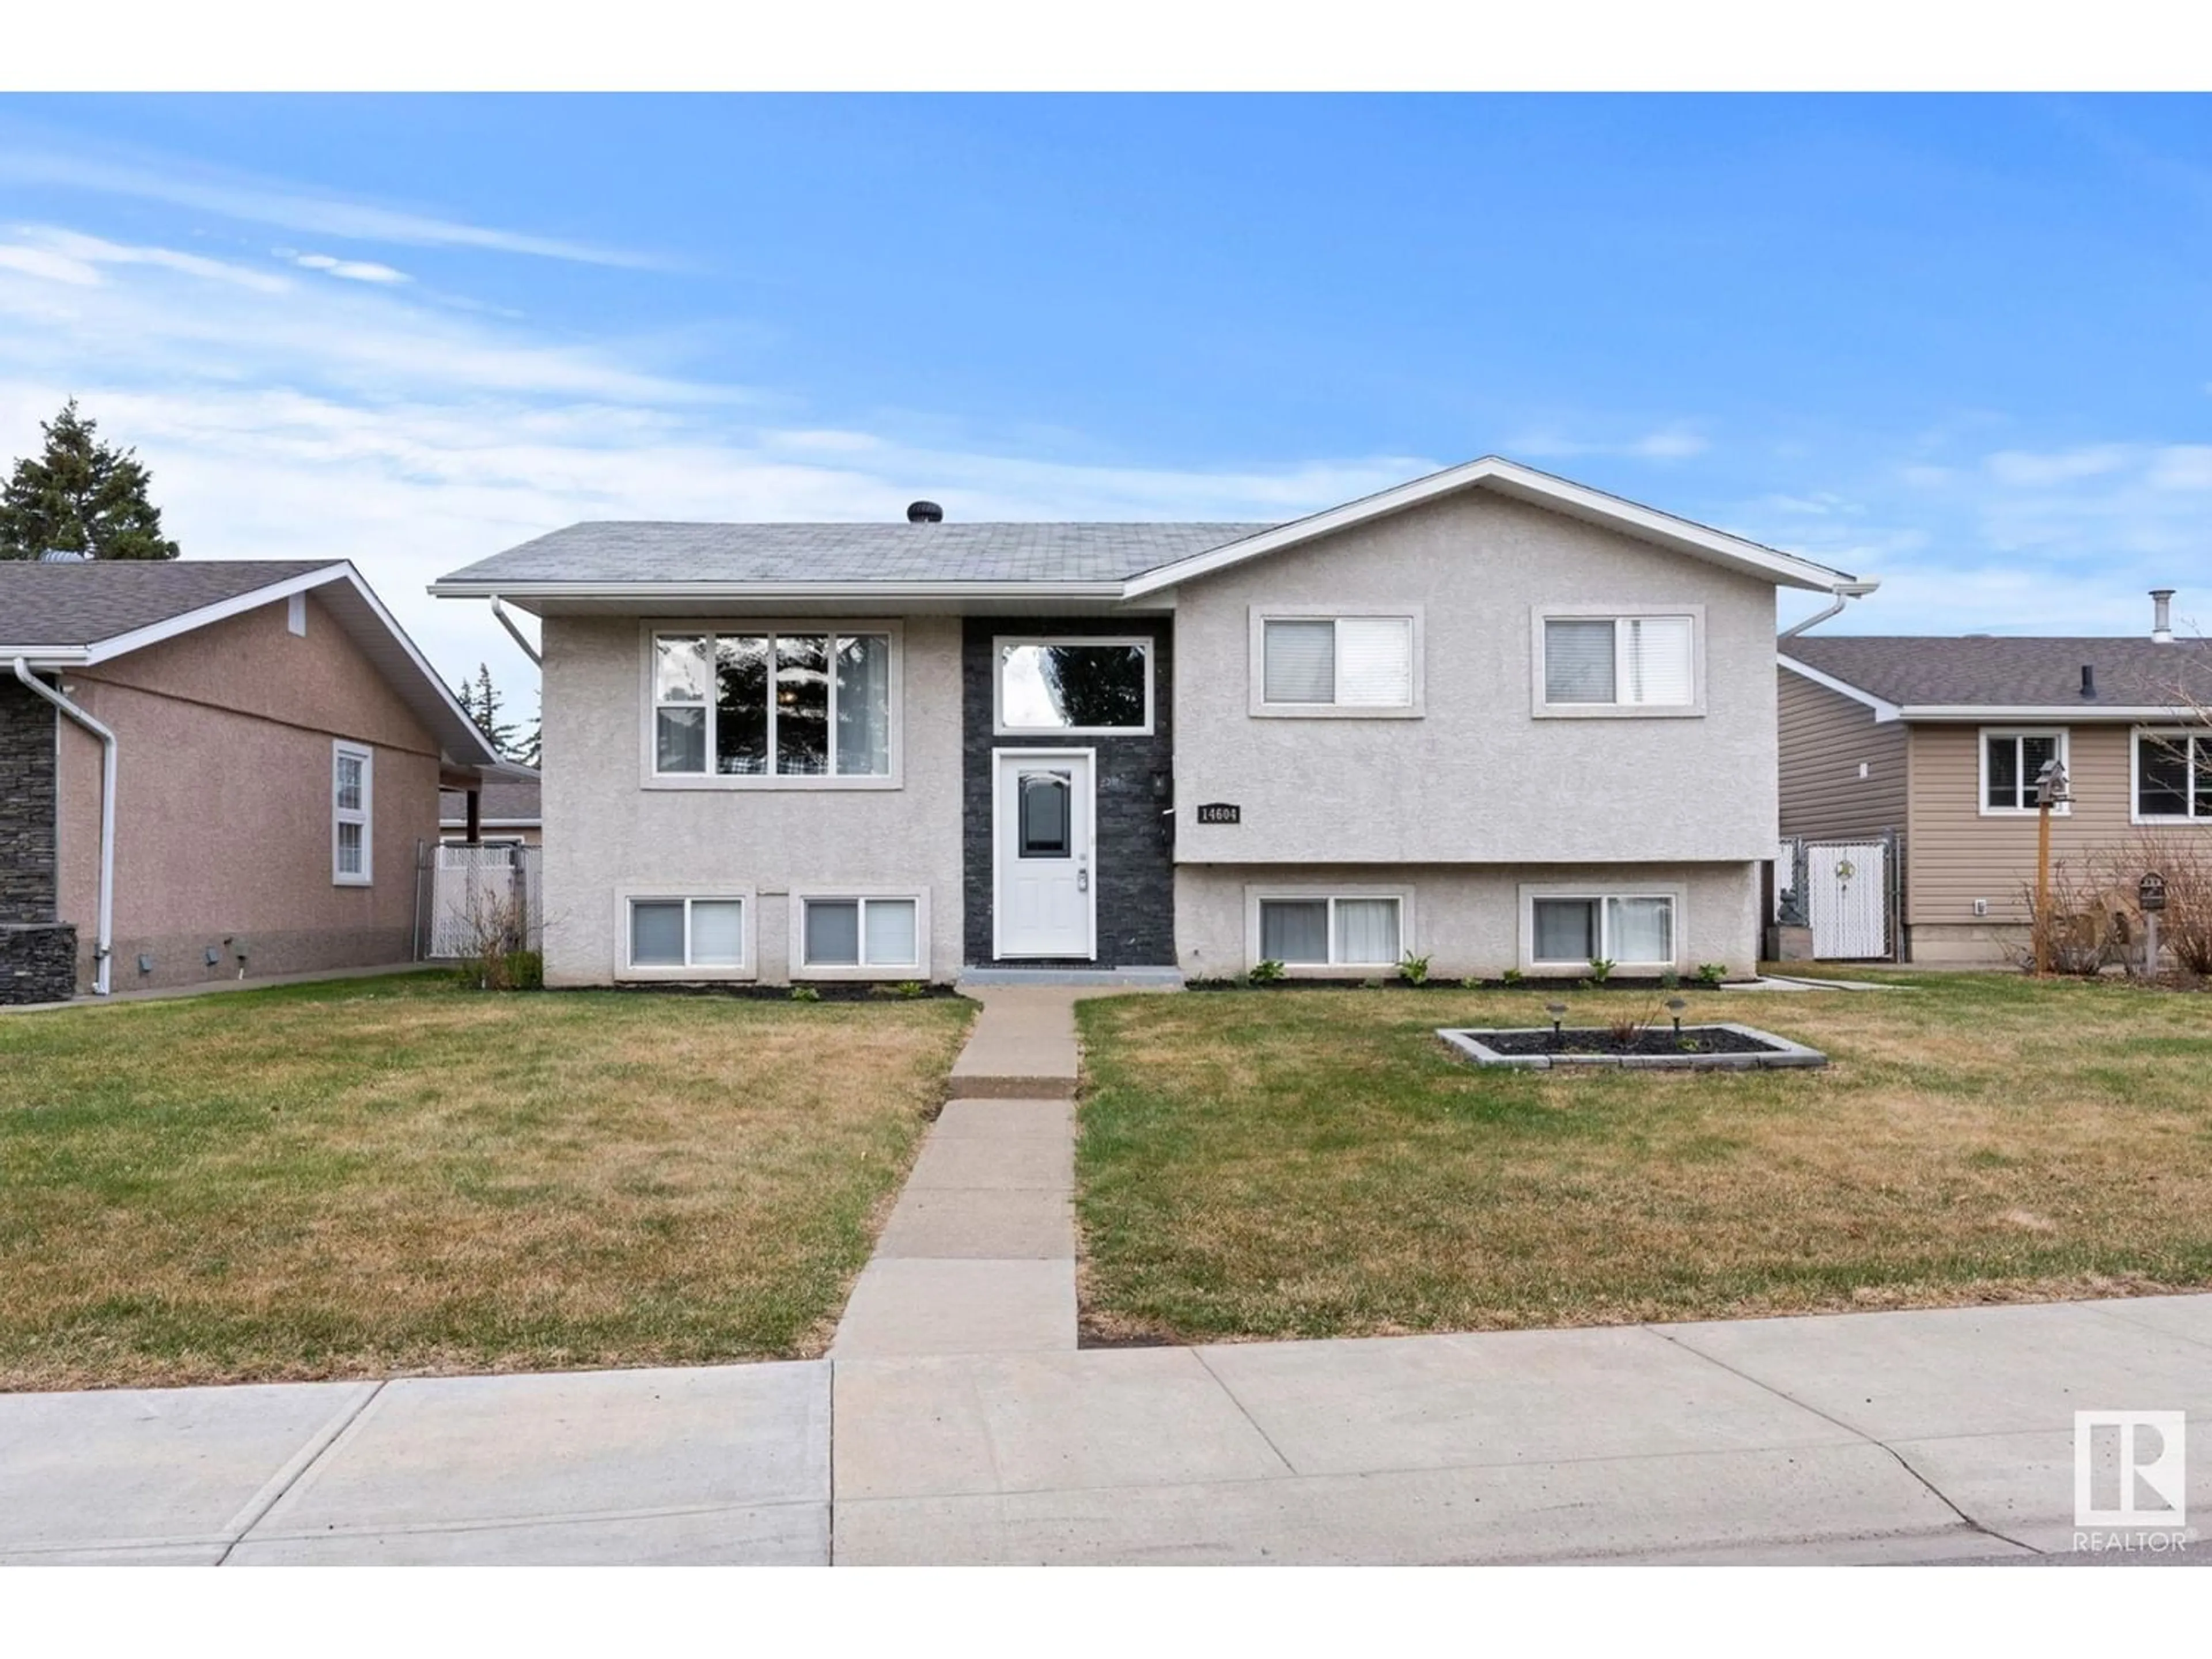 Frontside or backside of a home for 14604 80 ST NW, Edmonton Alberta T5C1L9